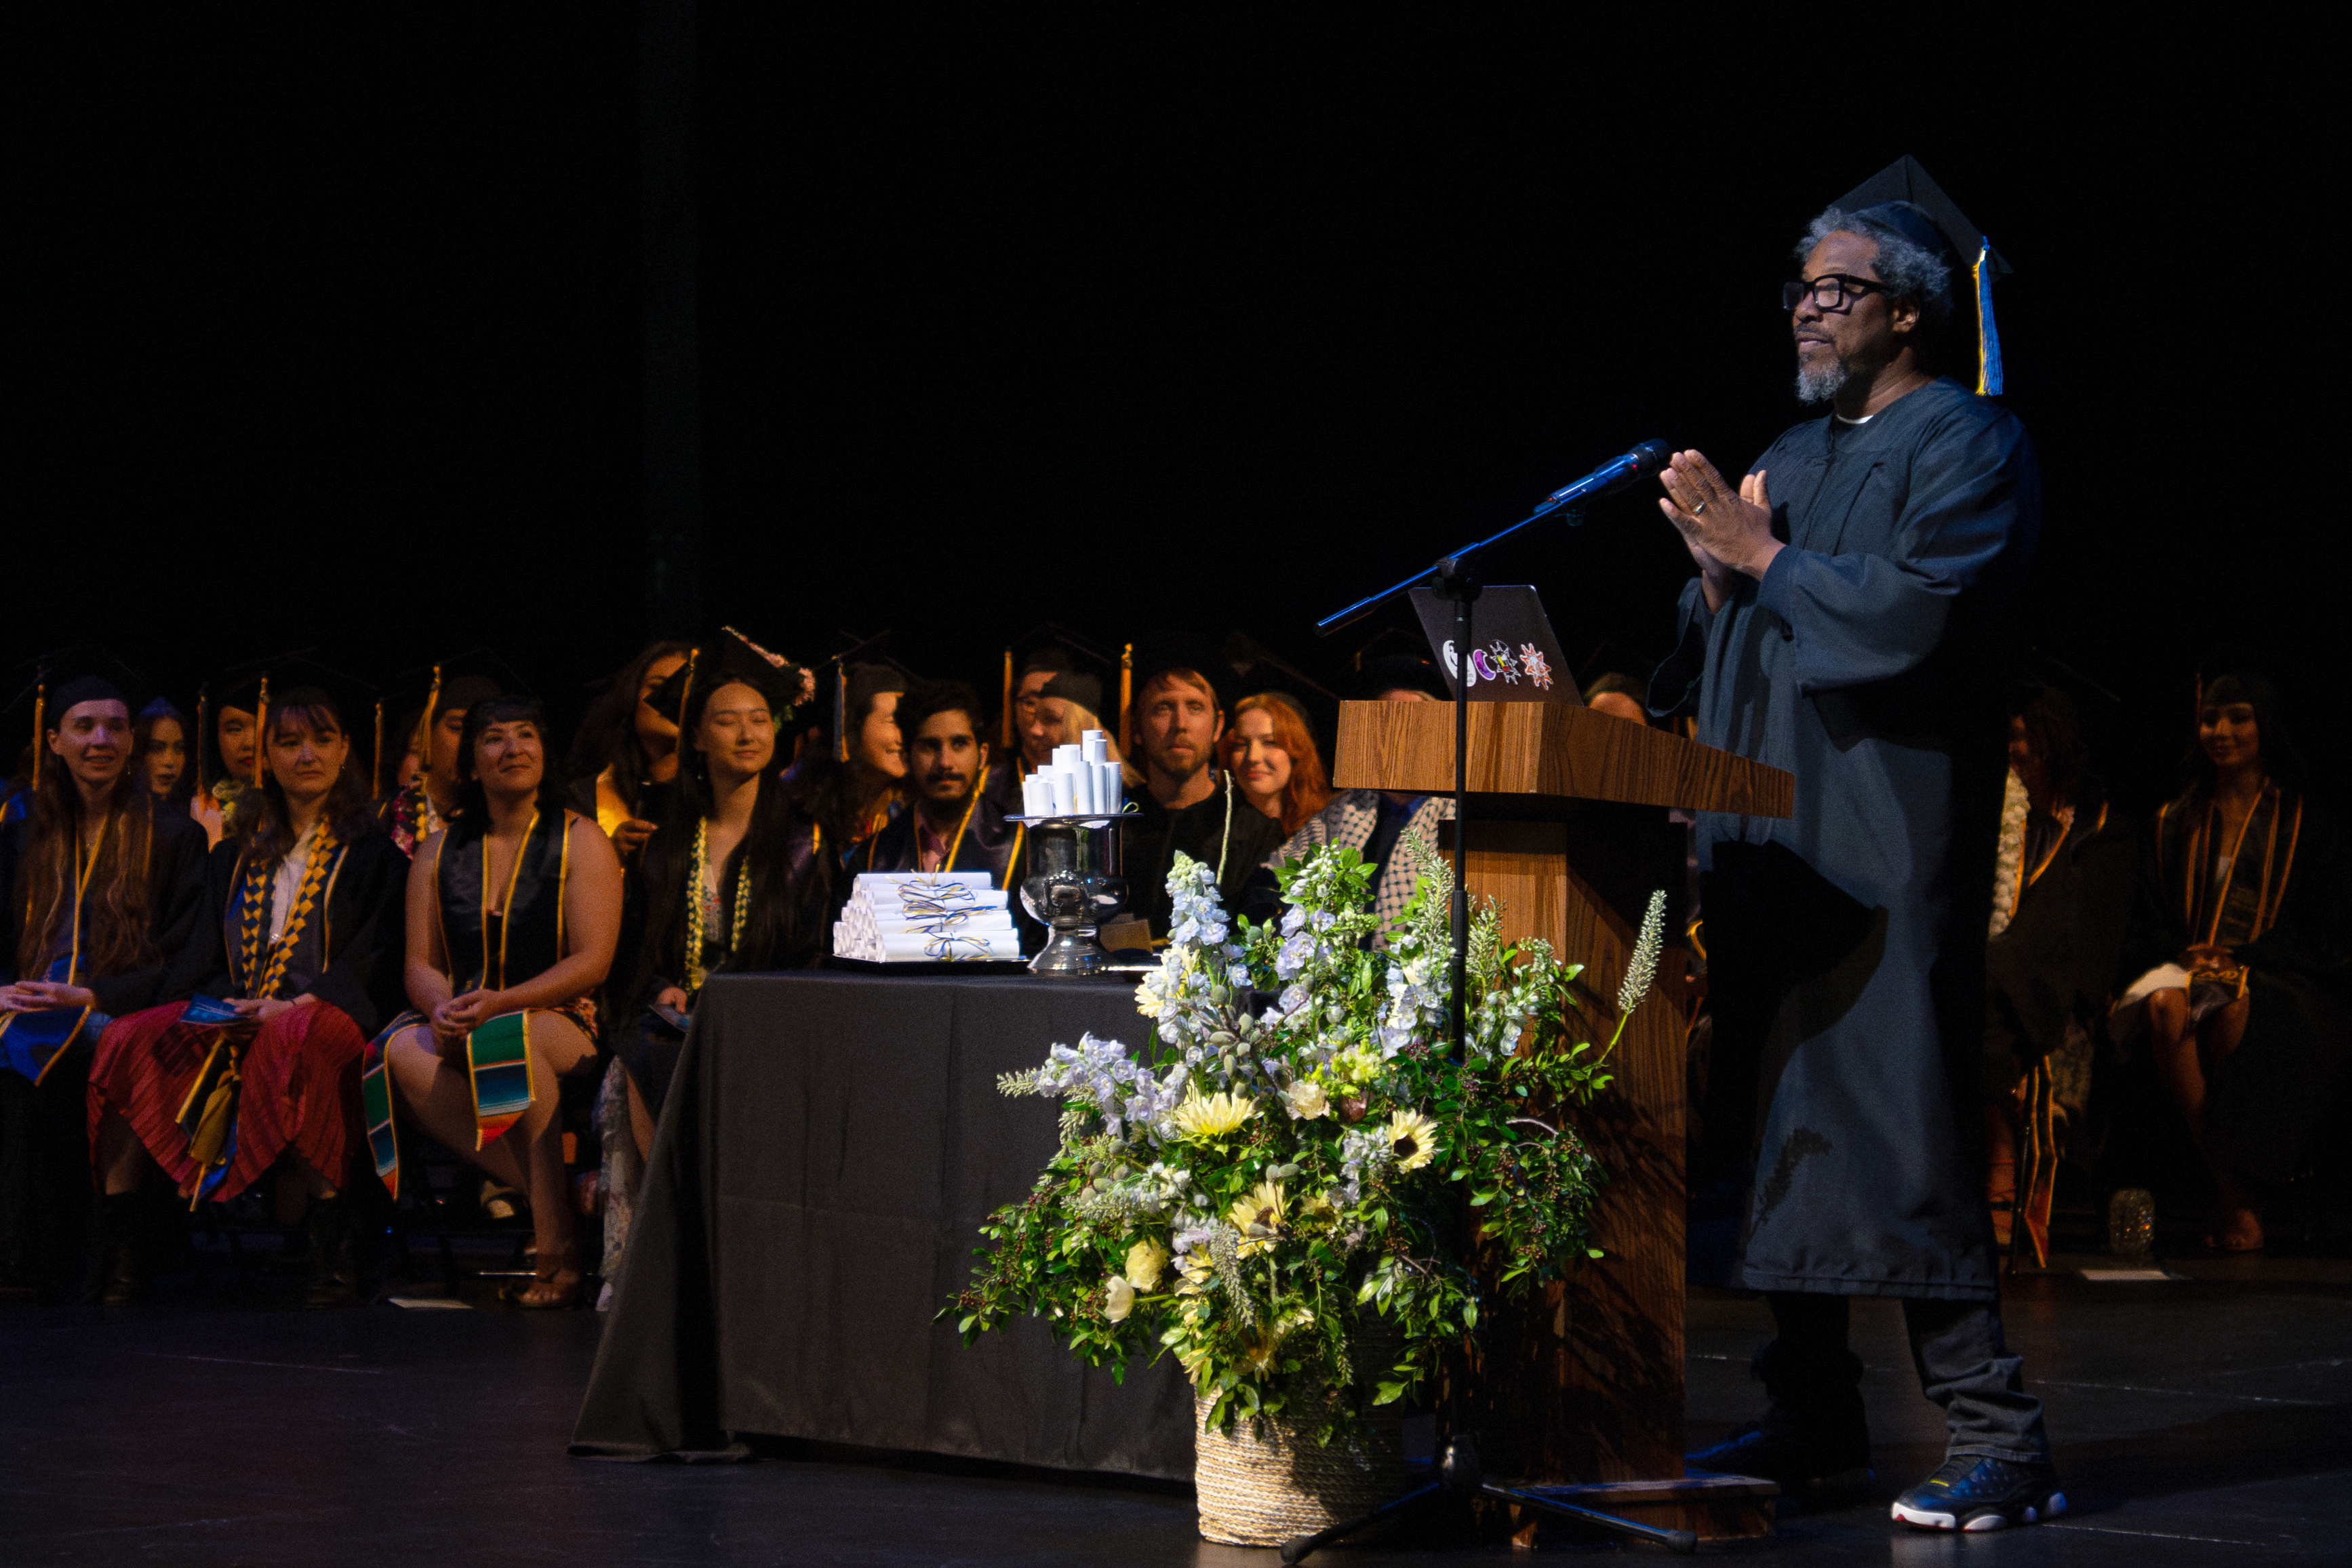 W Kamau Bell stands a podium during commencement, hands together, as graduates look on